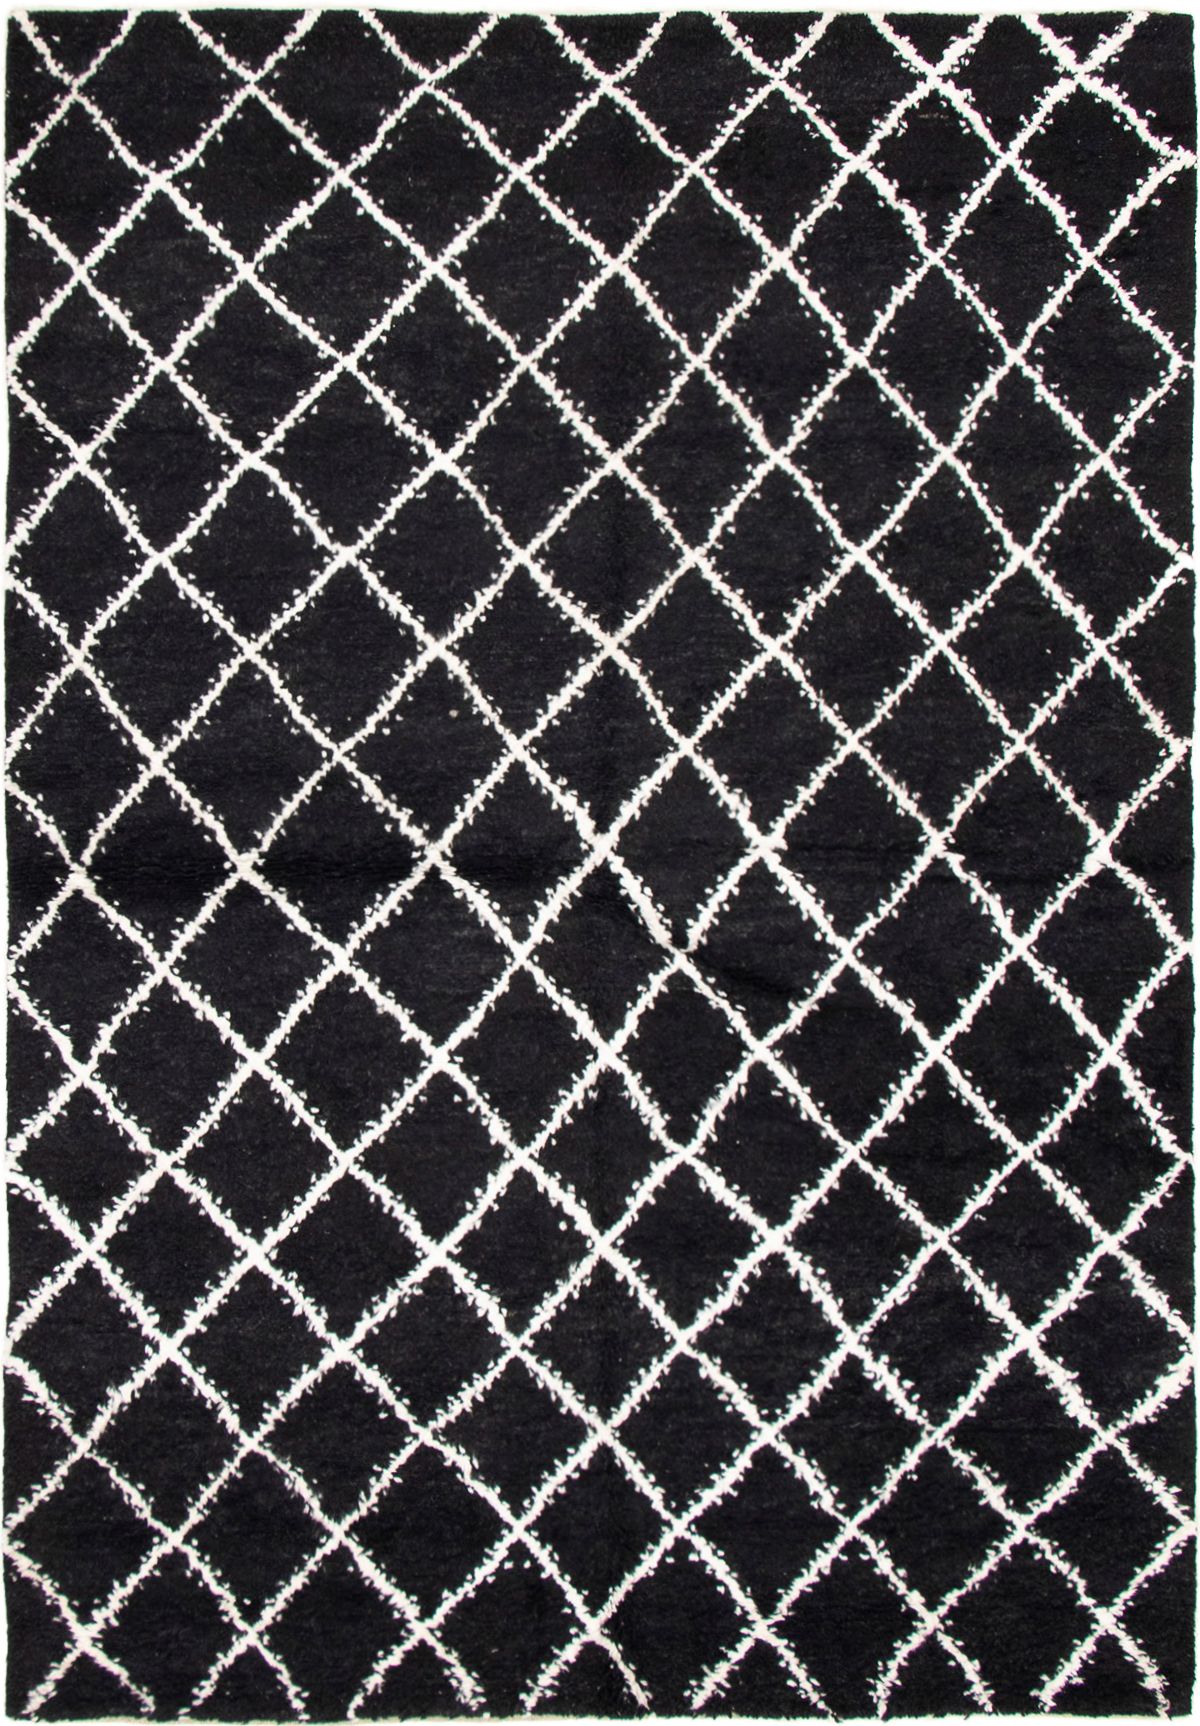 Hand-knotted Arlequin Black Wool Rug 6'0" x 9'0" Size: 6'0" x 9'0"  